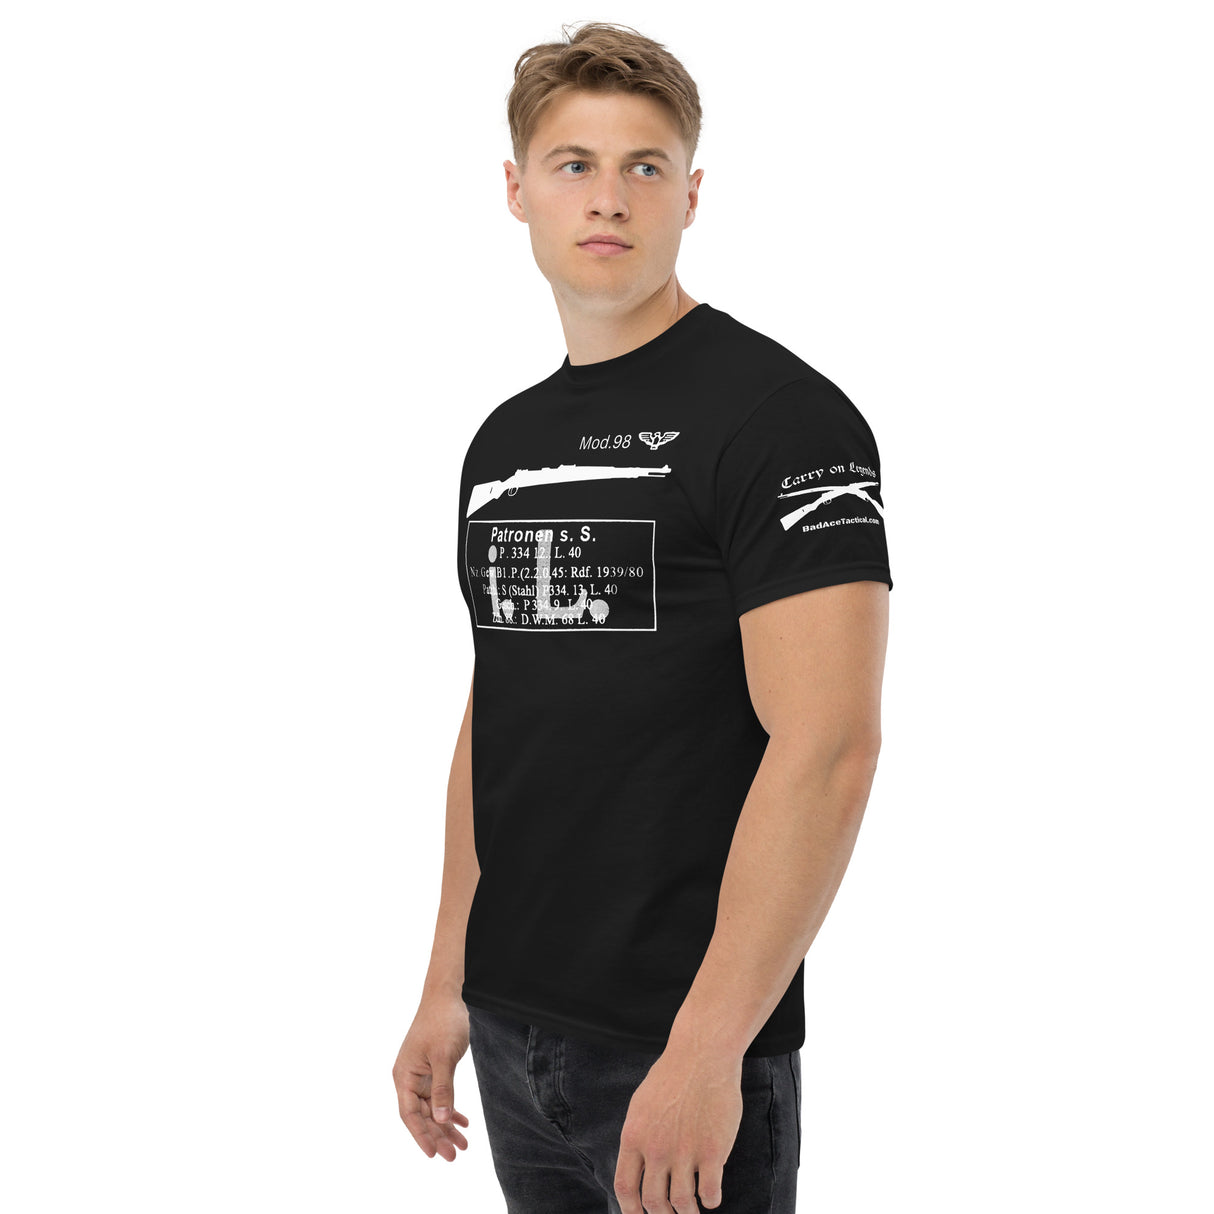 Mauser K98k Karabiner 98 kurz cotton T-shirt with receiver stamps and ammo pack labels - light font